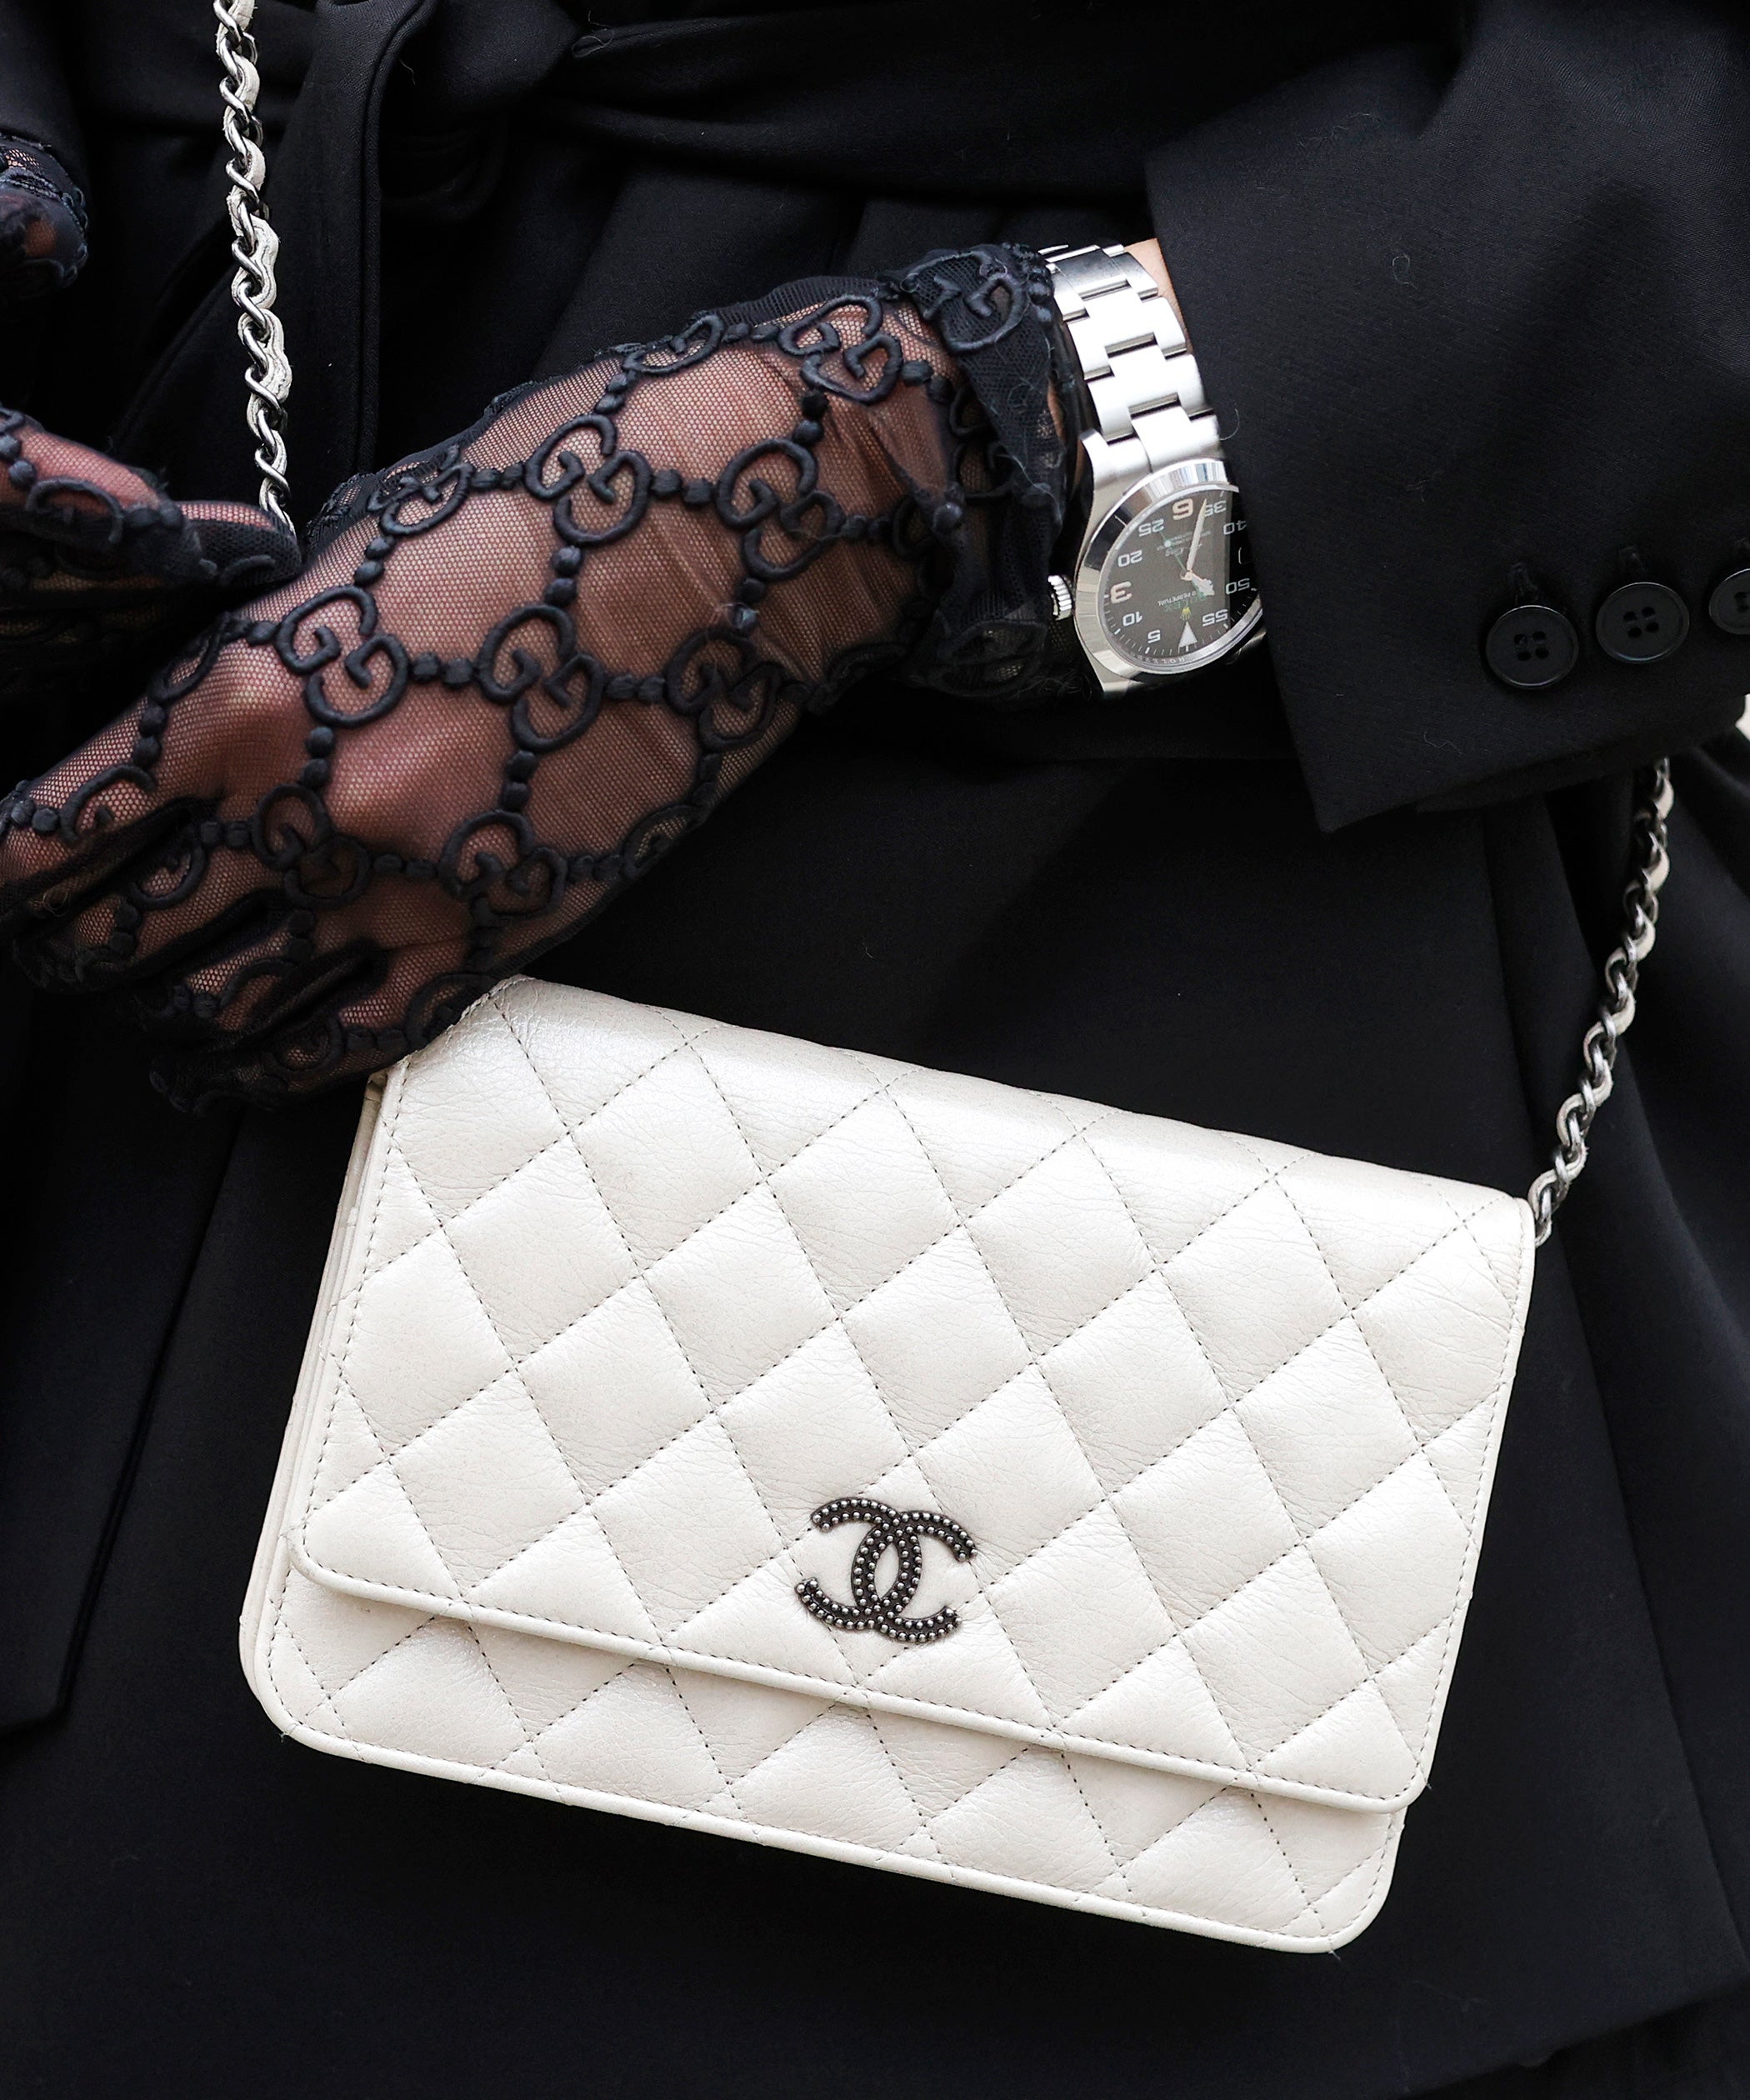 chanel investment bag